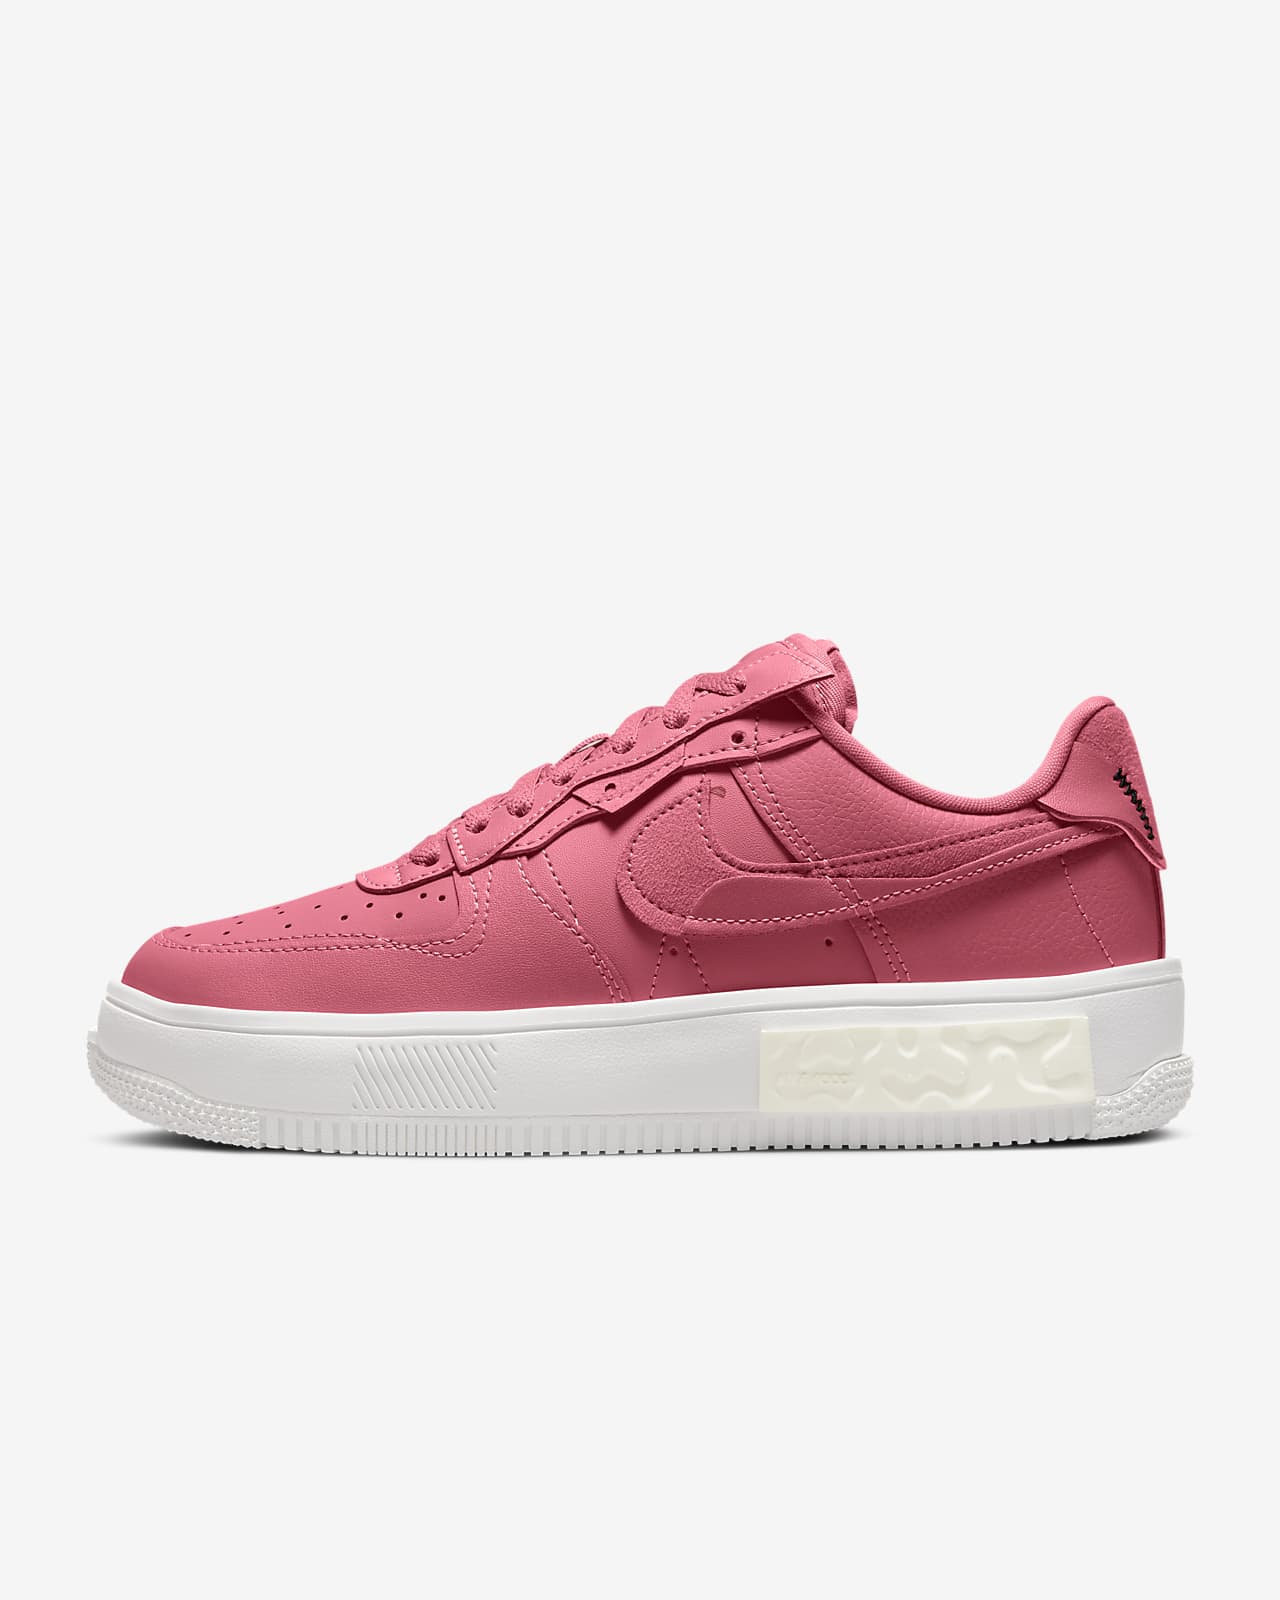 air force 1 donna con stelle